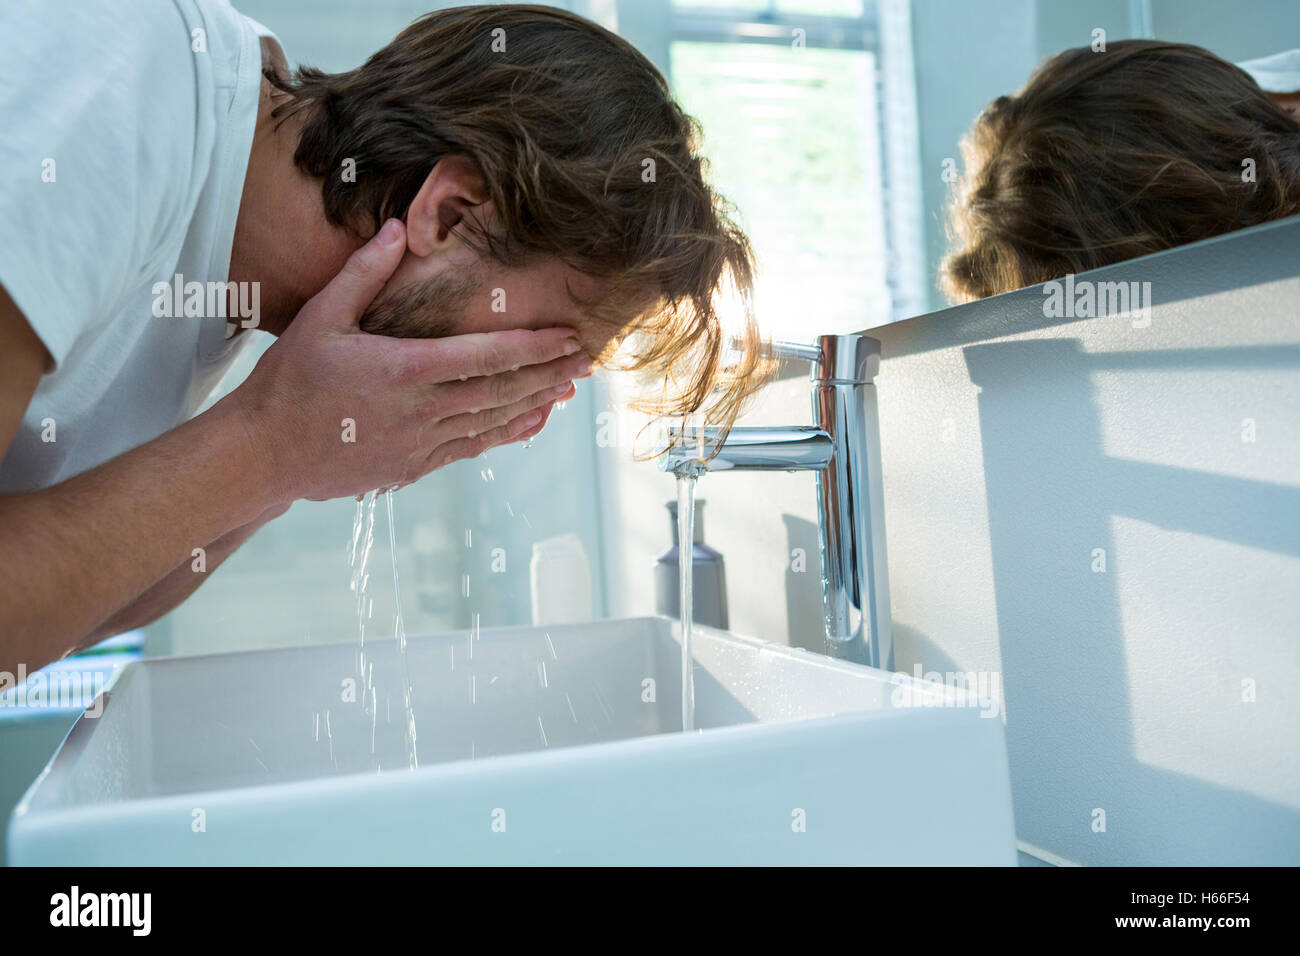 Man washing his face with water in bathroom Stock Photo